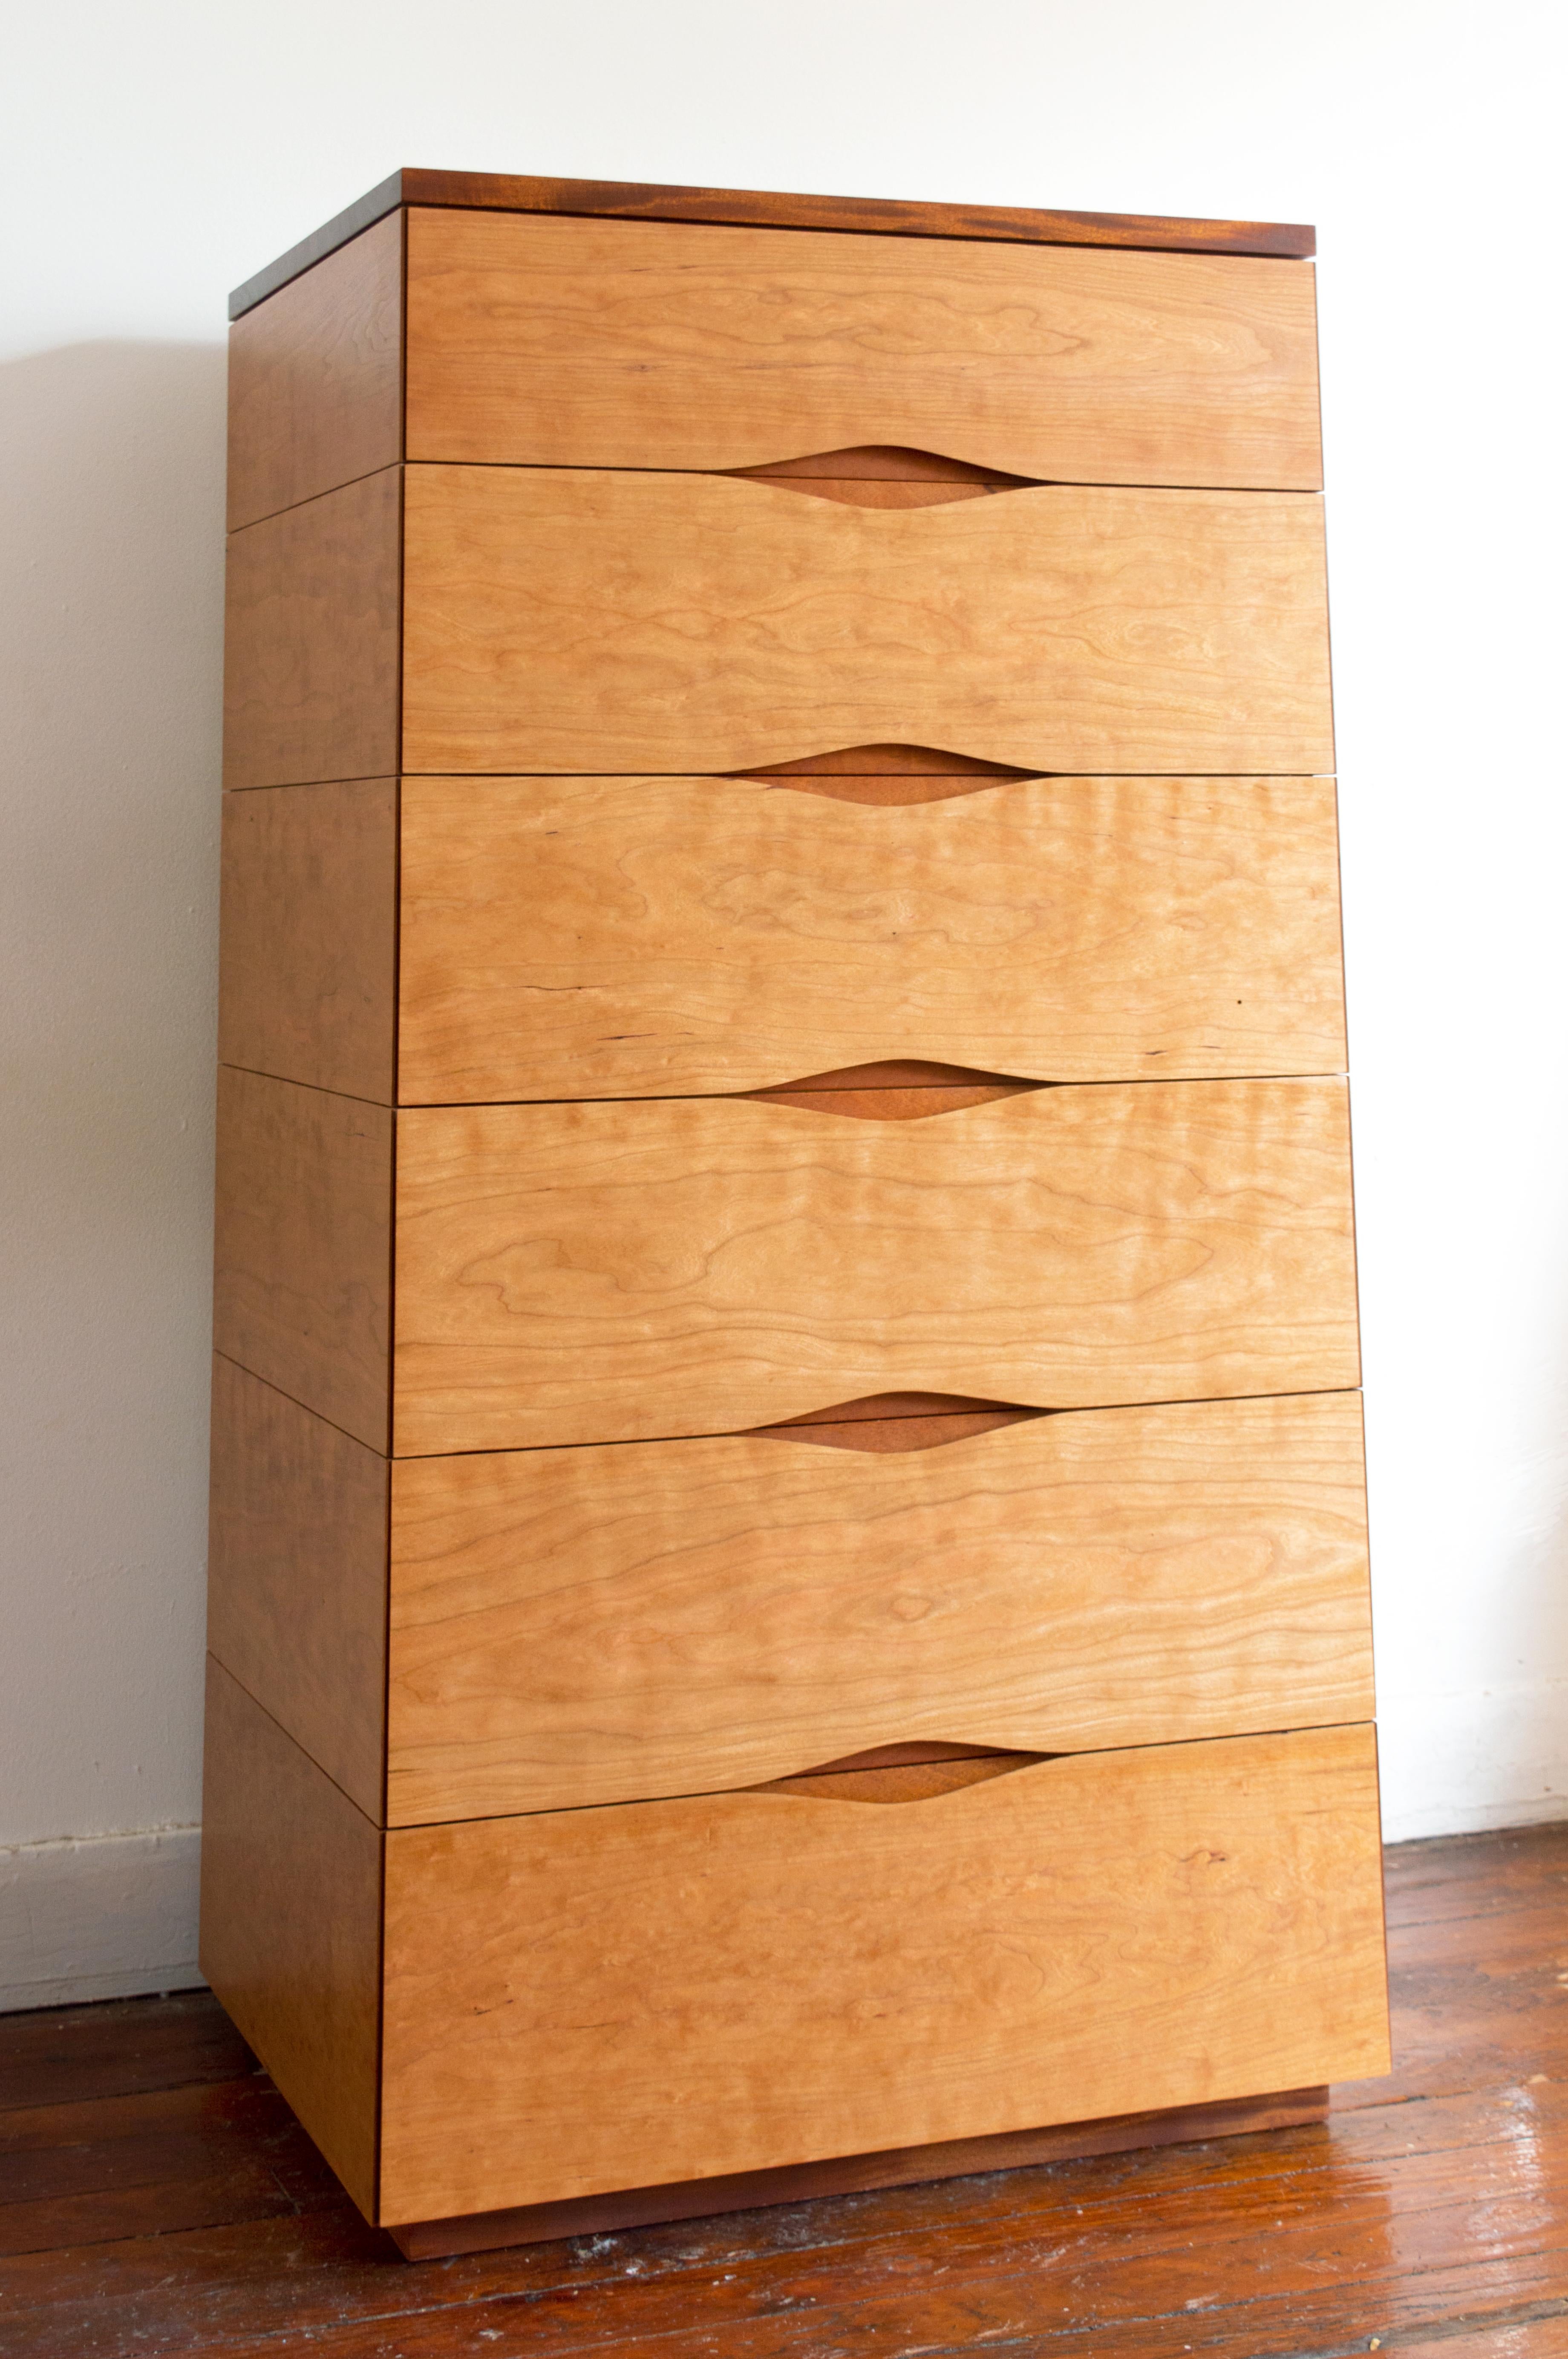 A playful monolith. The austere geometry and delineation of this tall chest of drawers are undermined by the rippling figure of the wraparound cherry cladding and the “flame” pattern of the mahogany top. 
And then there is the subtly sensuous